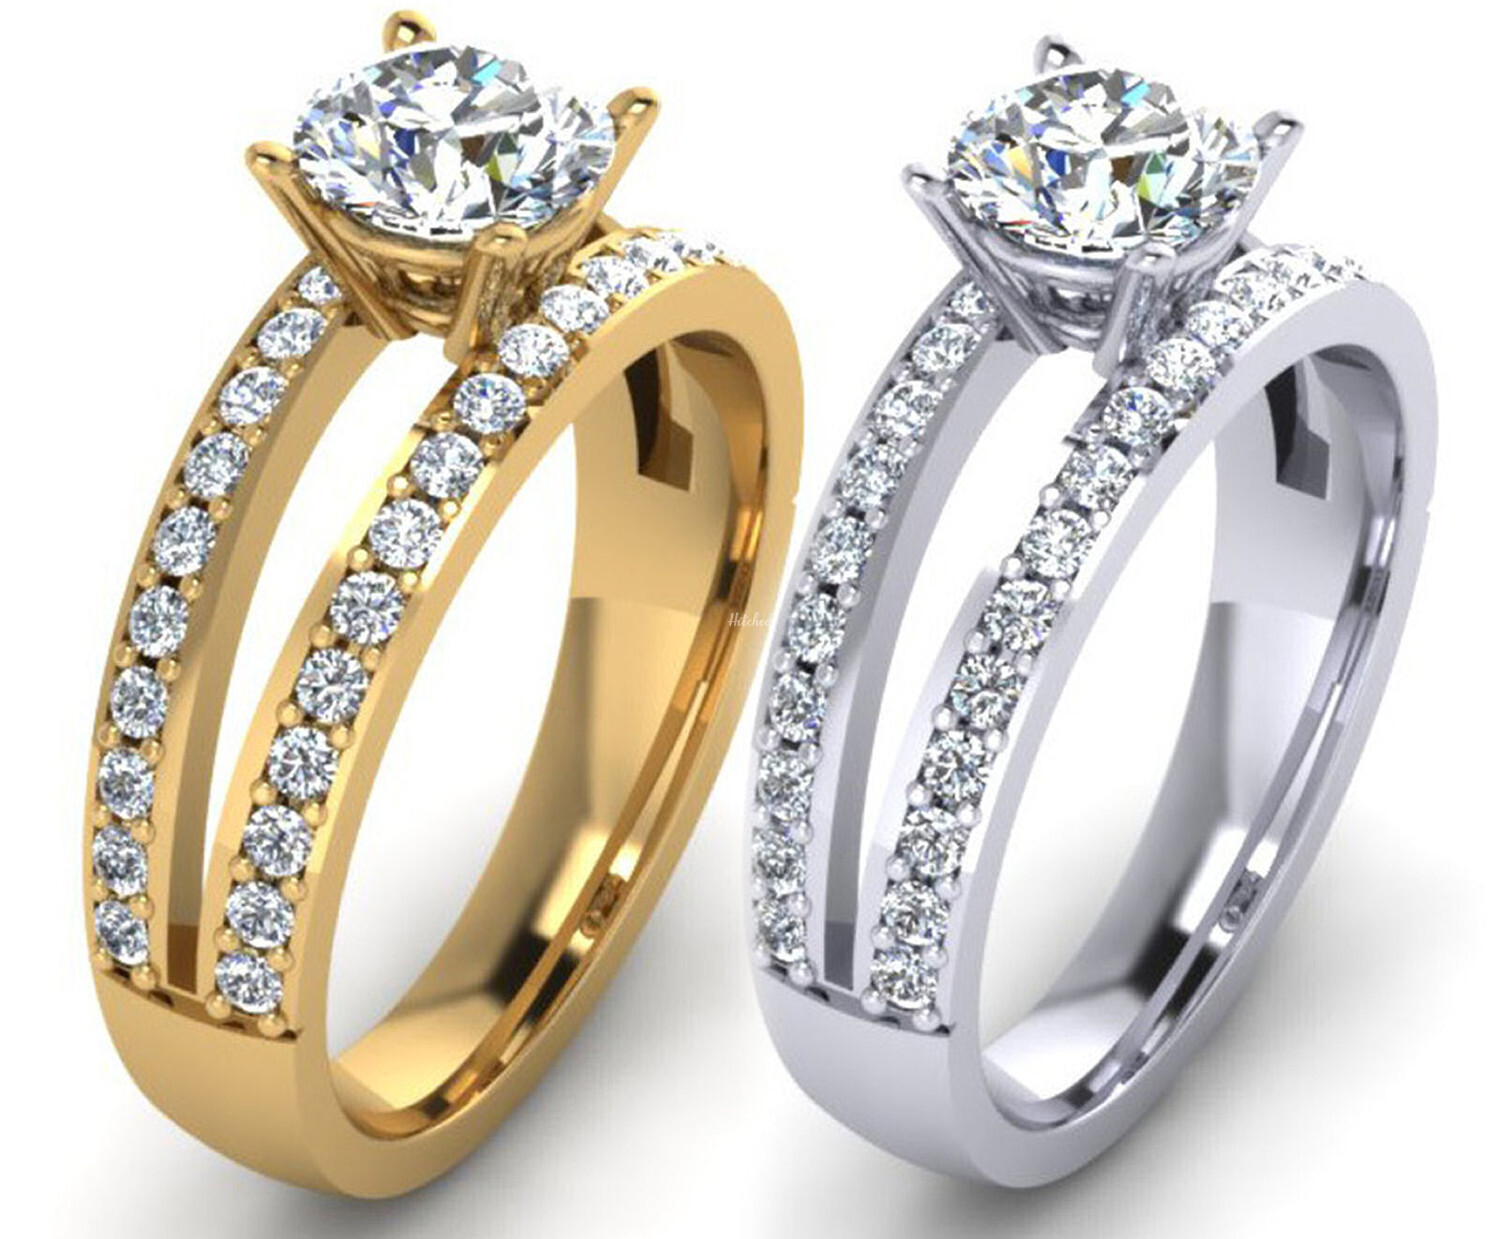 ENG 2 Wedding Ring from Goldfinger Rings - hitched.co.uk